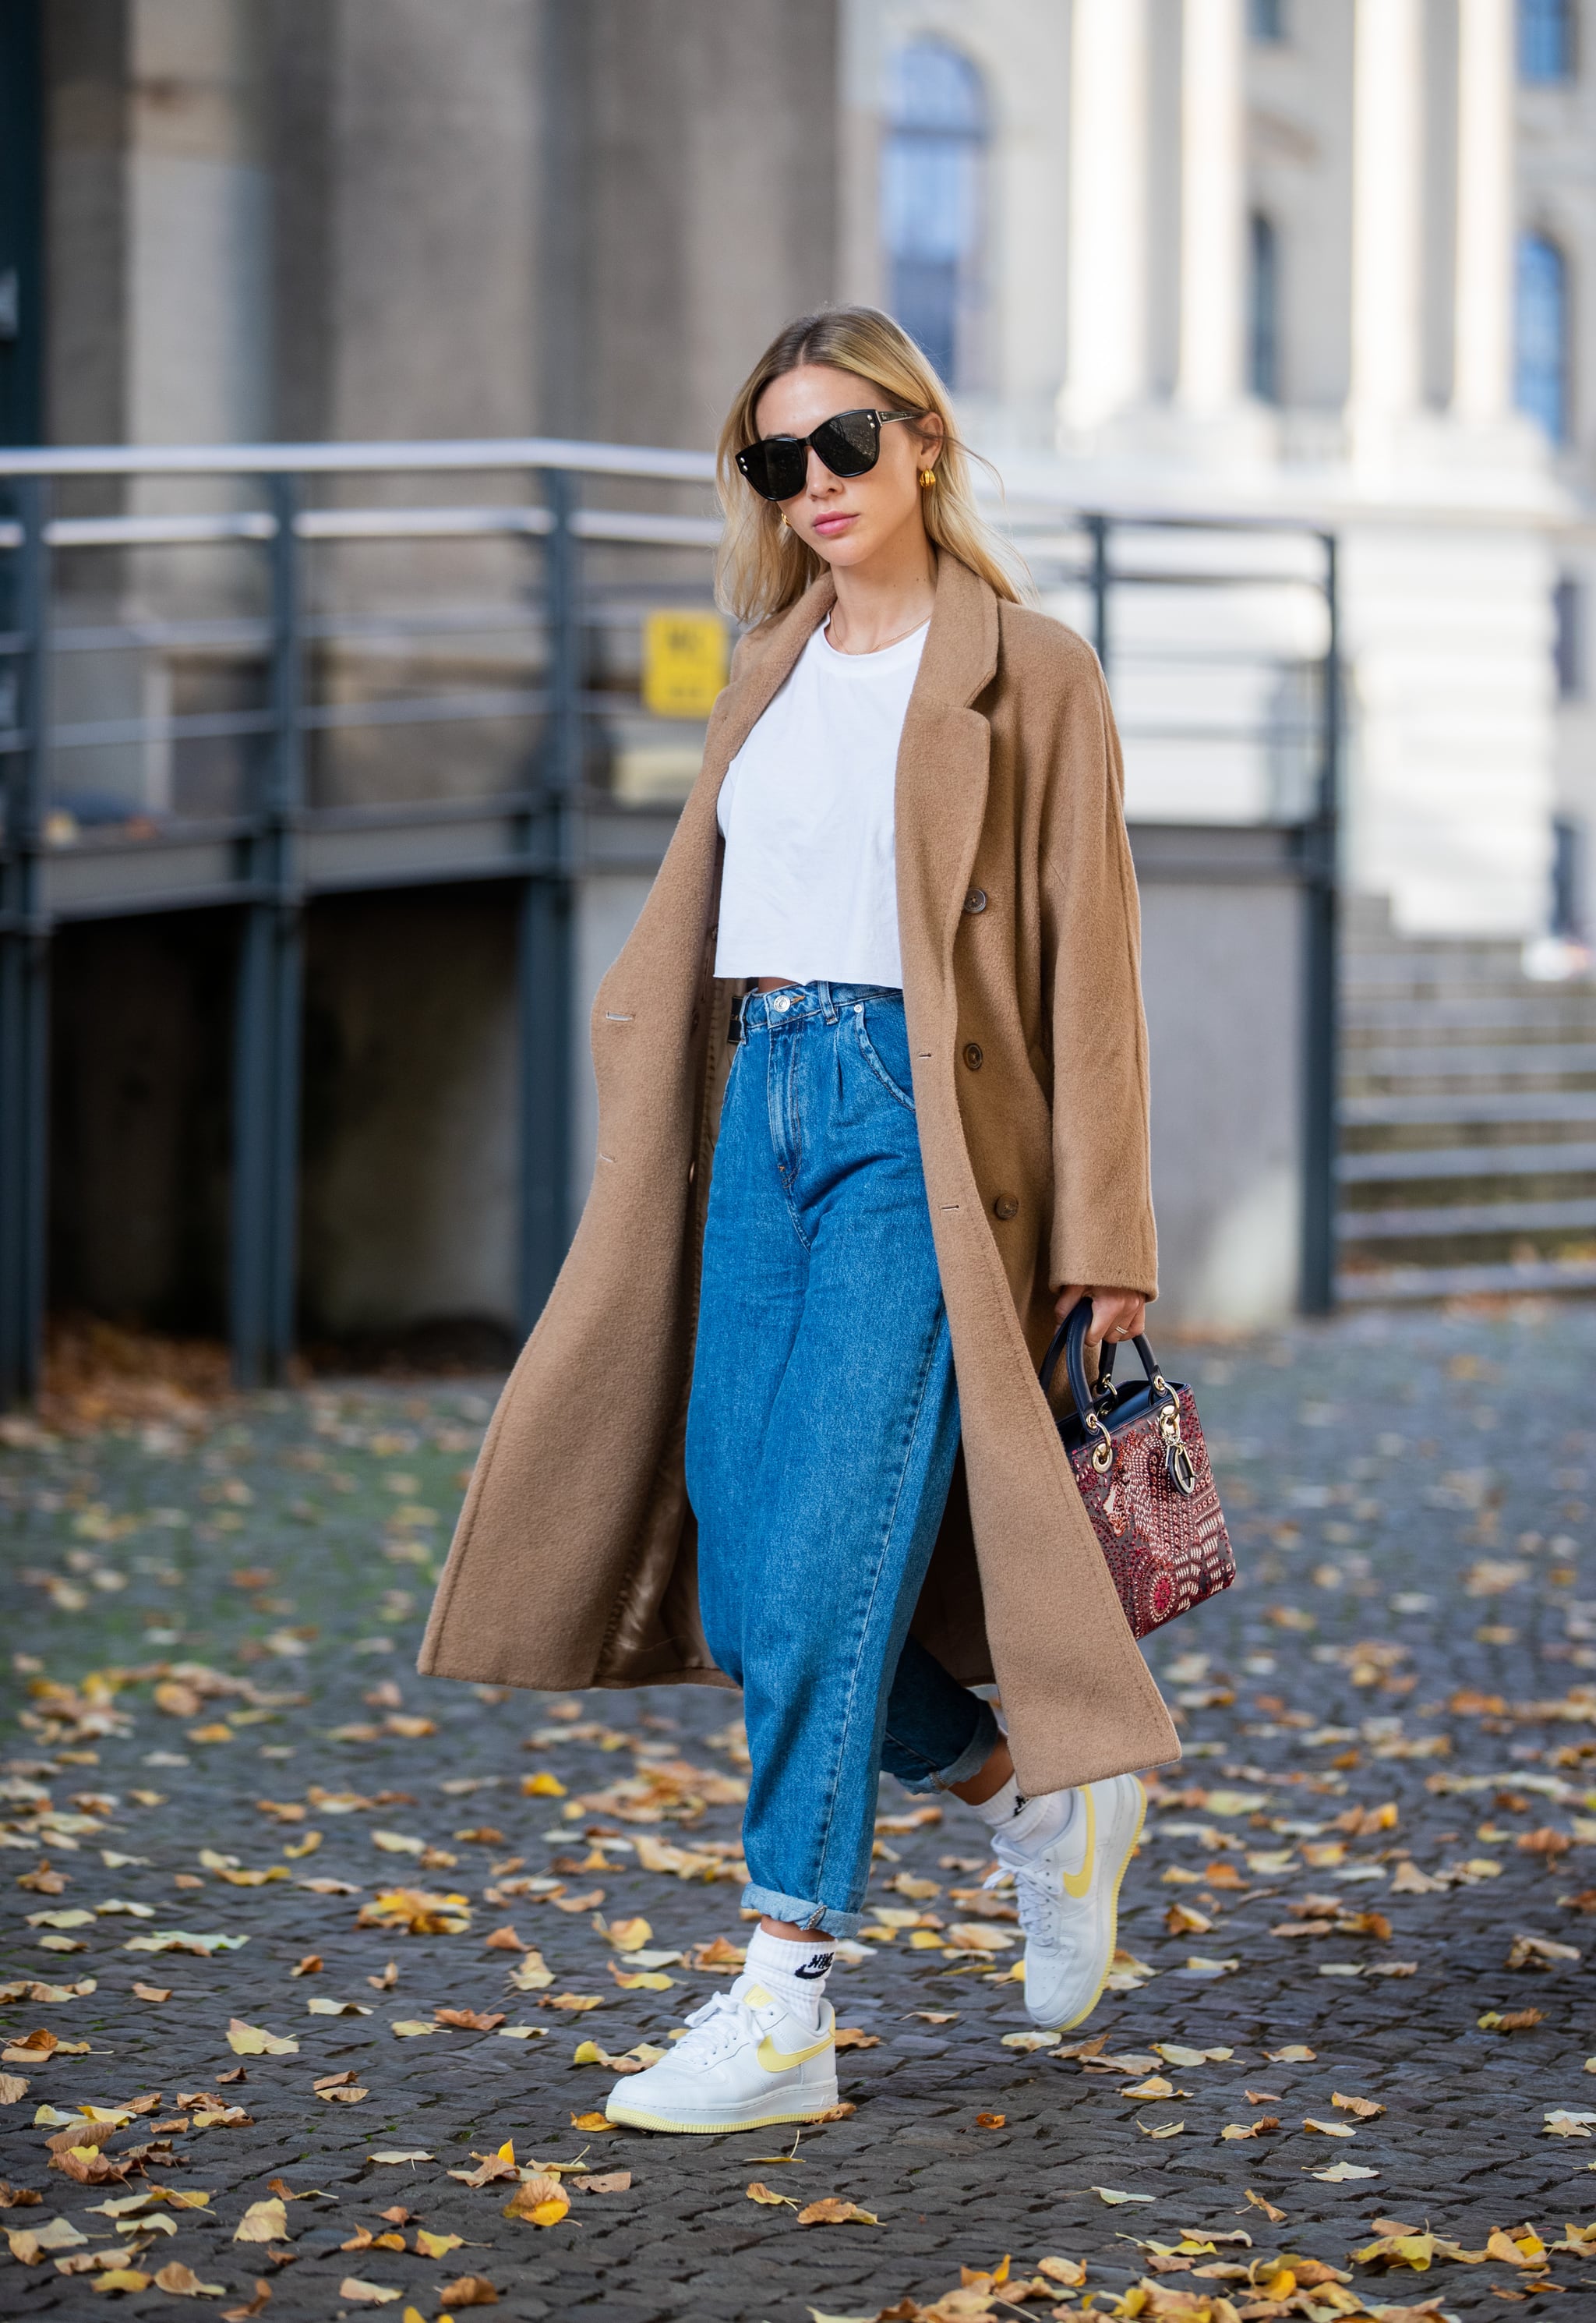 15 Ways to Wear Leather Pants Like a Total Fashion Pro This Season